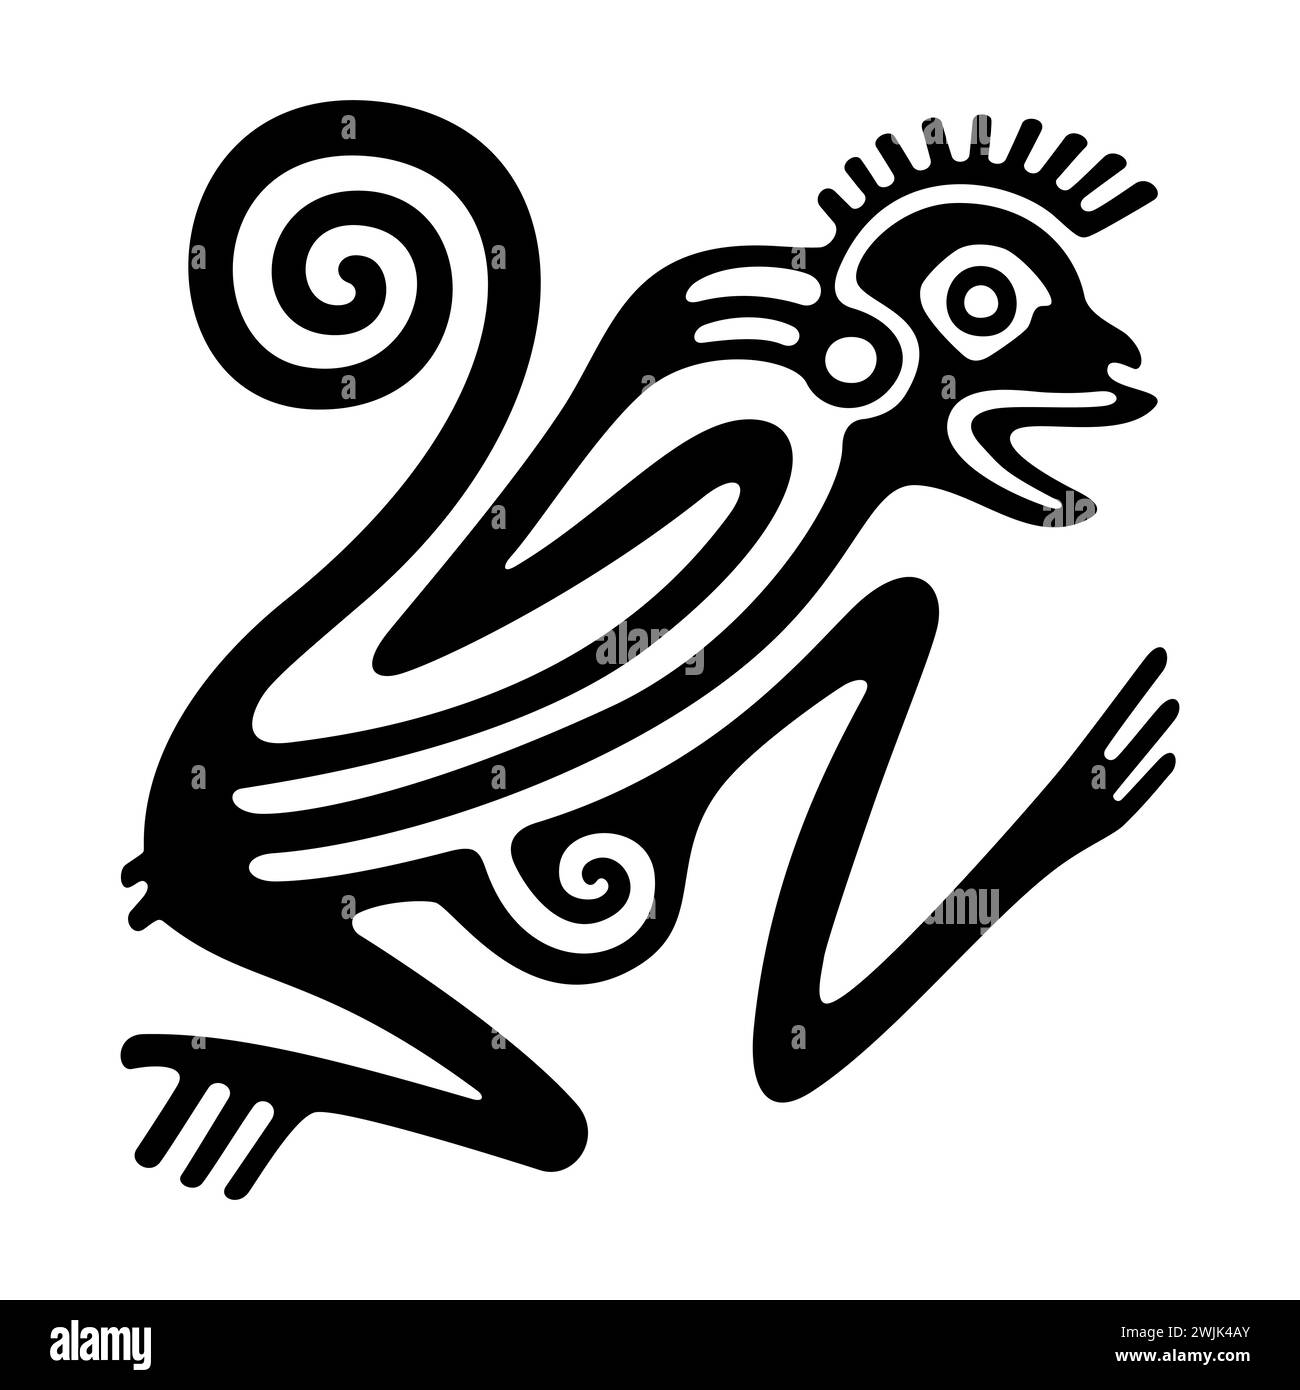 Monkey symbol of ancient Mexico. Decorative Aztec clay stamp motif showing an Ozomahtli, as it was found in pre-Columbian Veracruz. Stock Photo